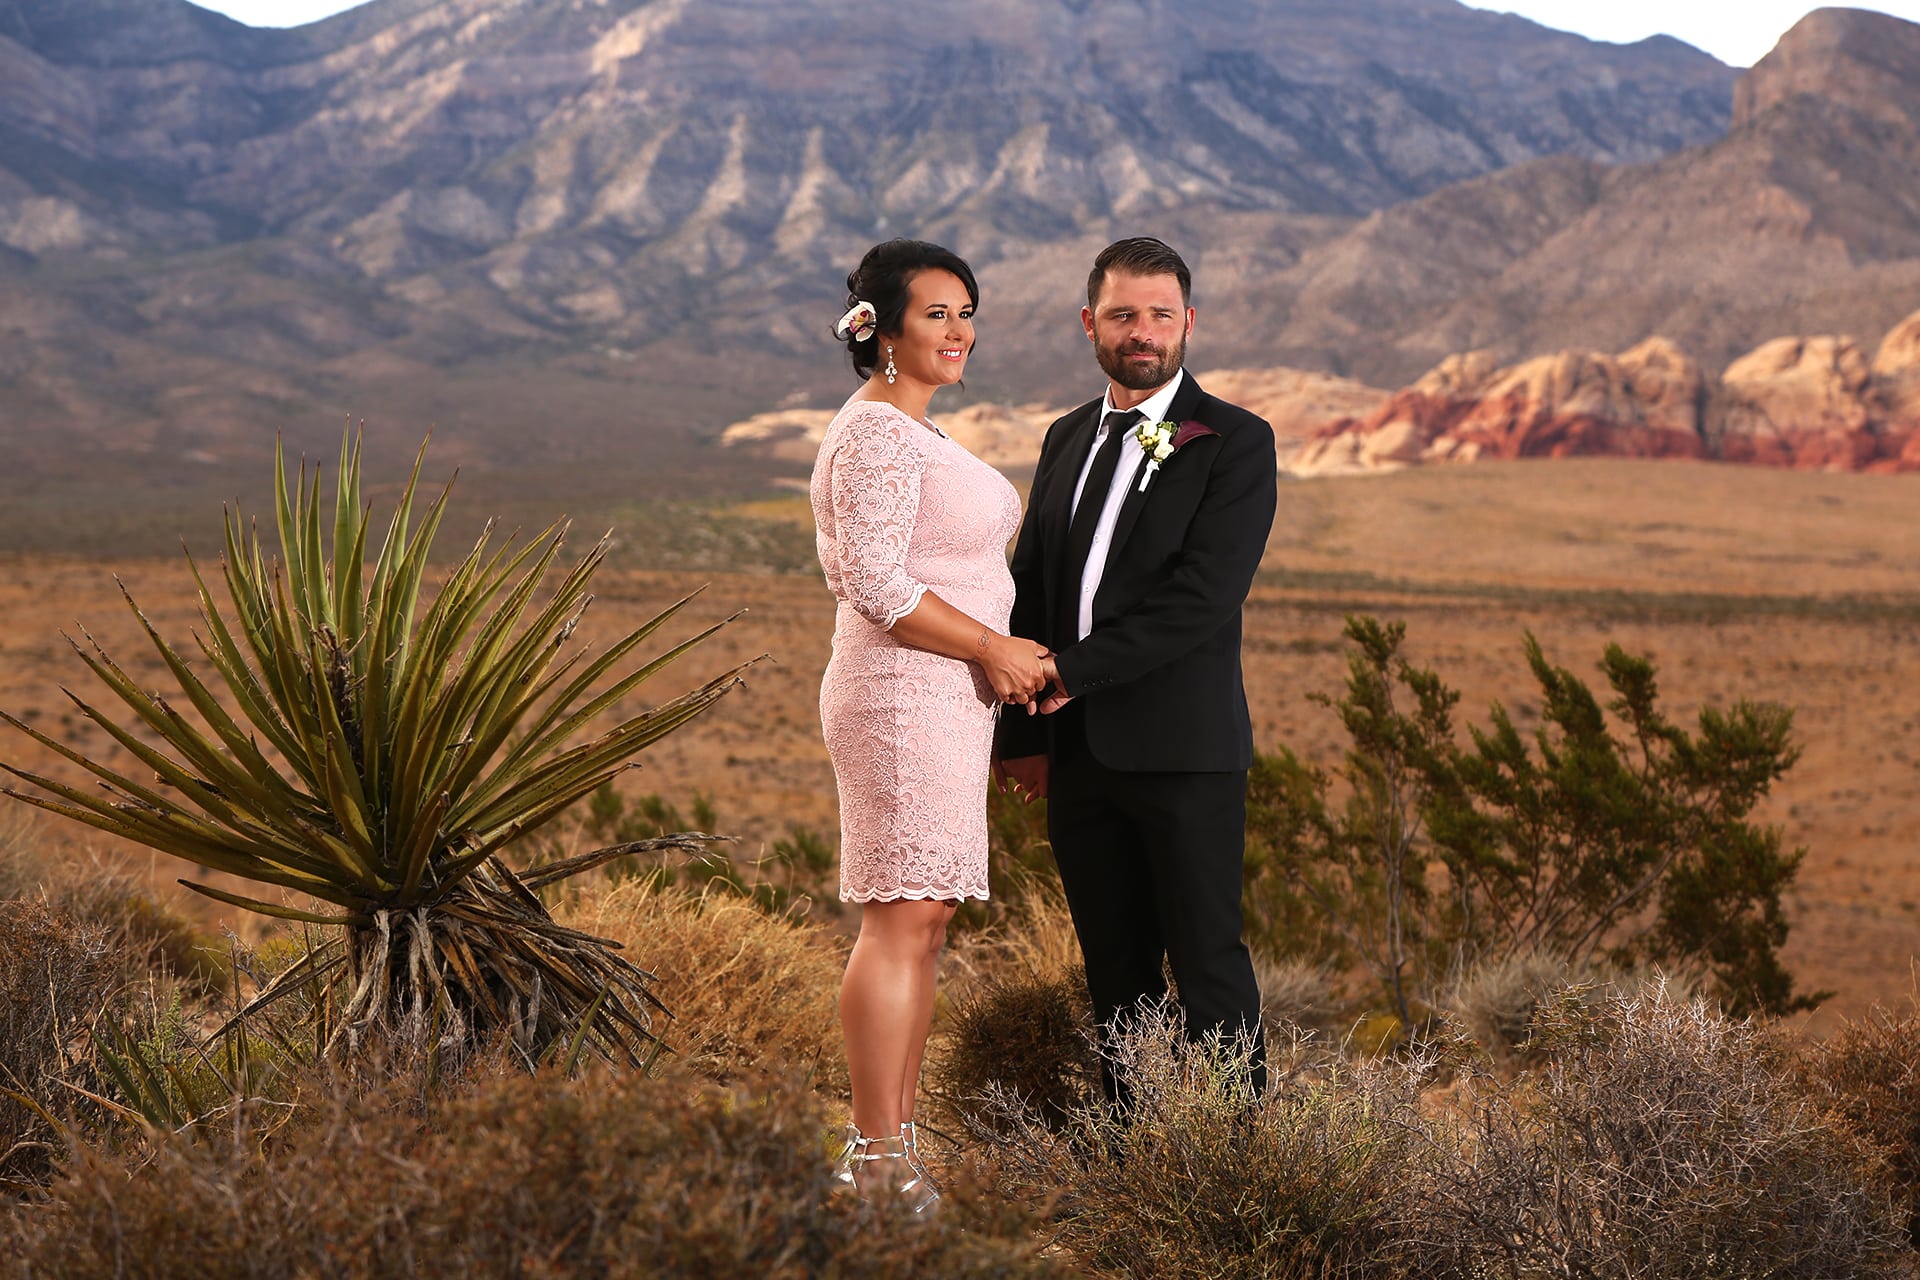 A bride and groom celebrating their special day amidst the breathtaking red rocks of a desert landscape.